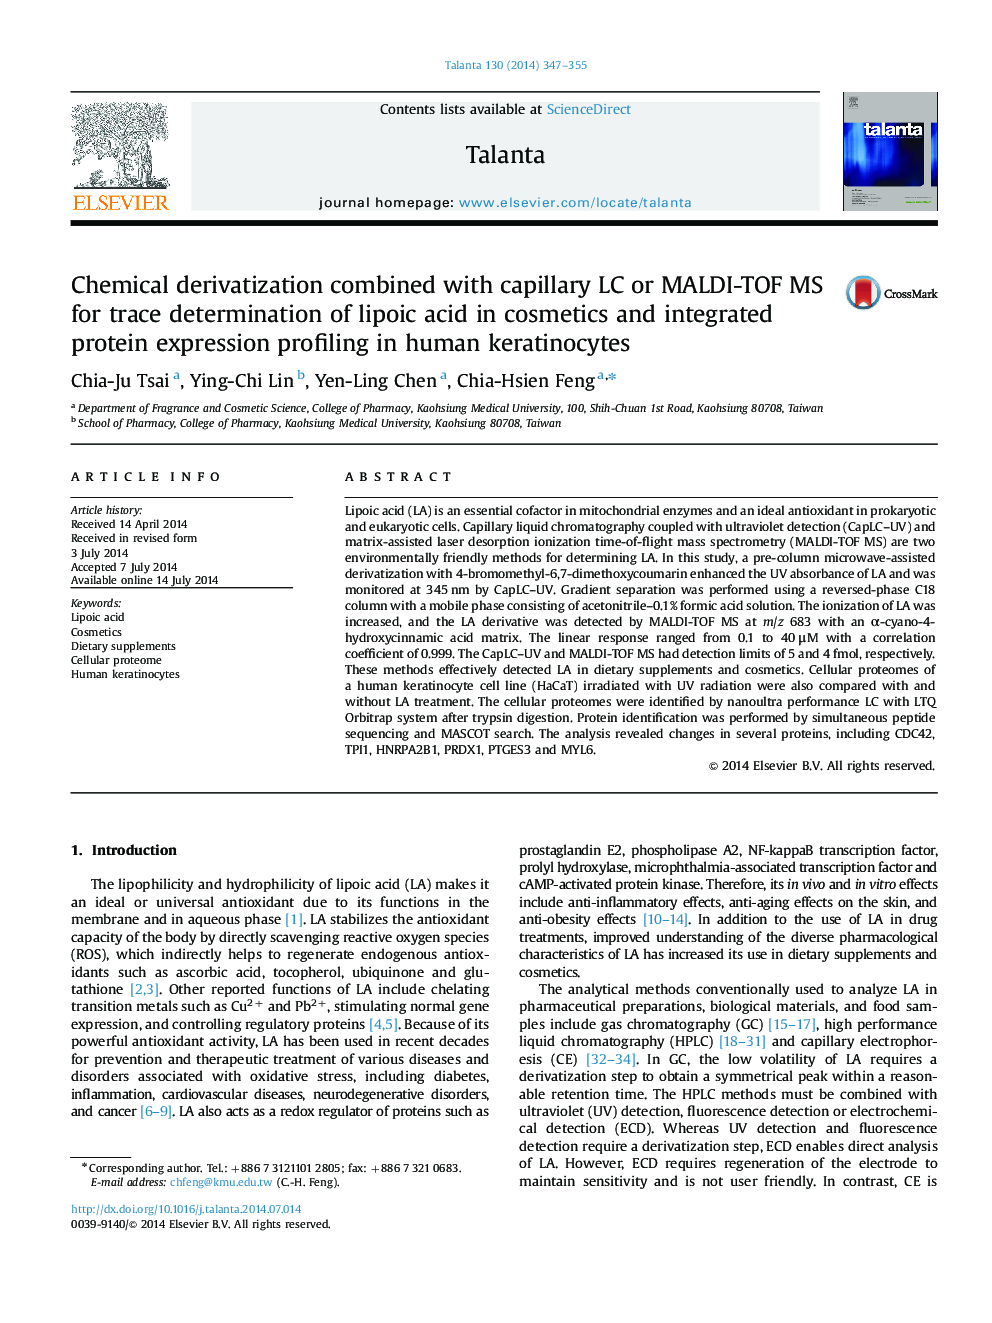 Chemical derivatization combined with capillary LC or MALDI-TOF MS for trace determination of lipoic acid in cosmetics and integrated protein expression profiling in human keratinocytes